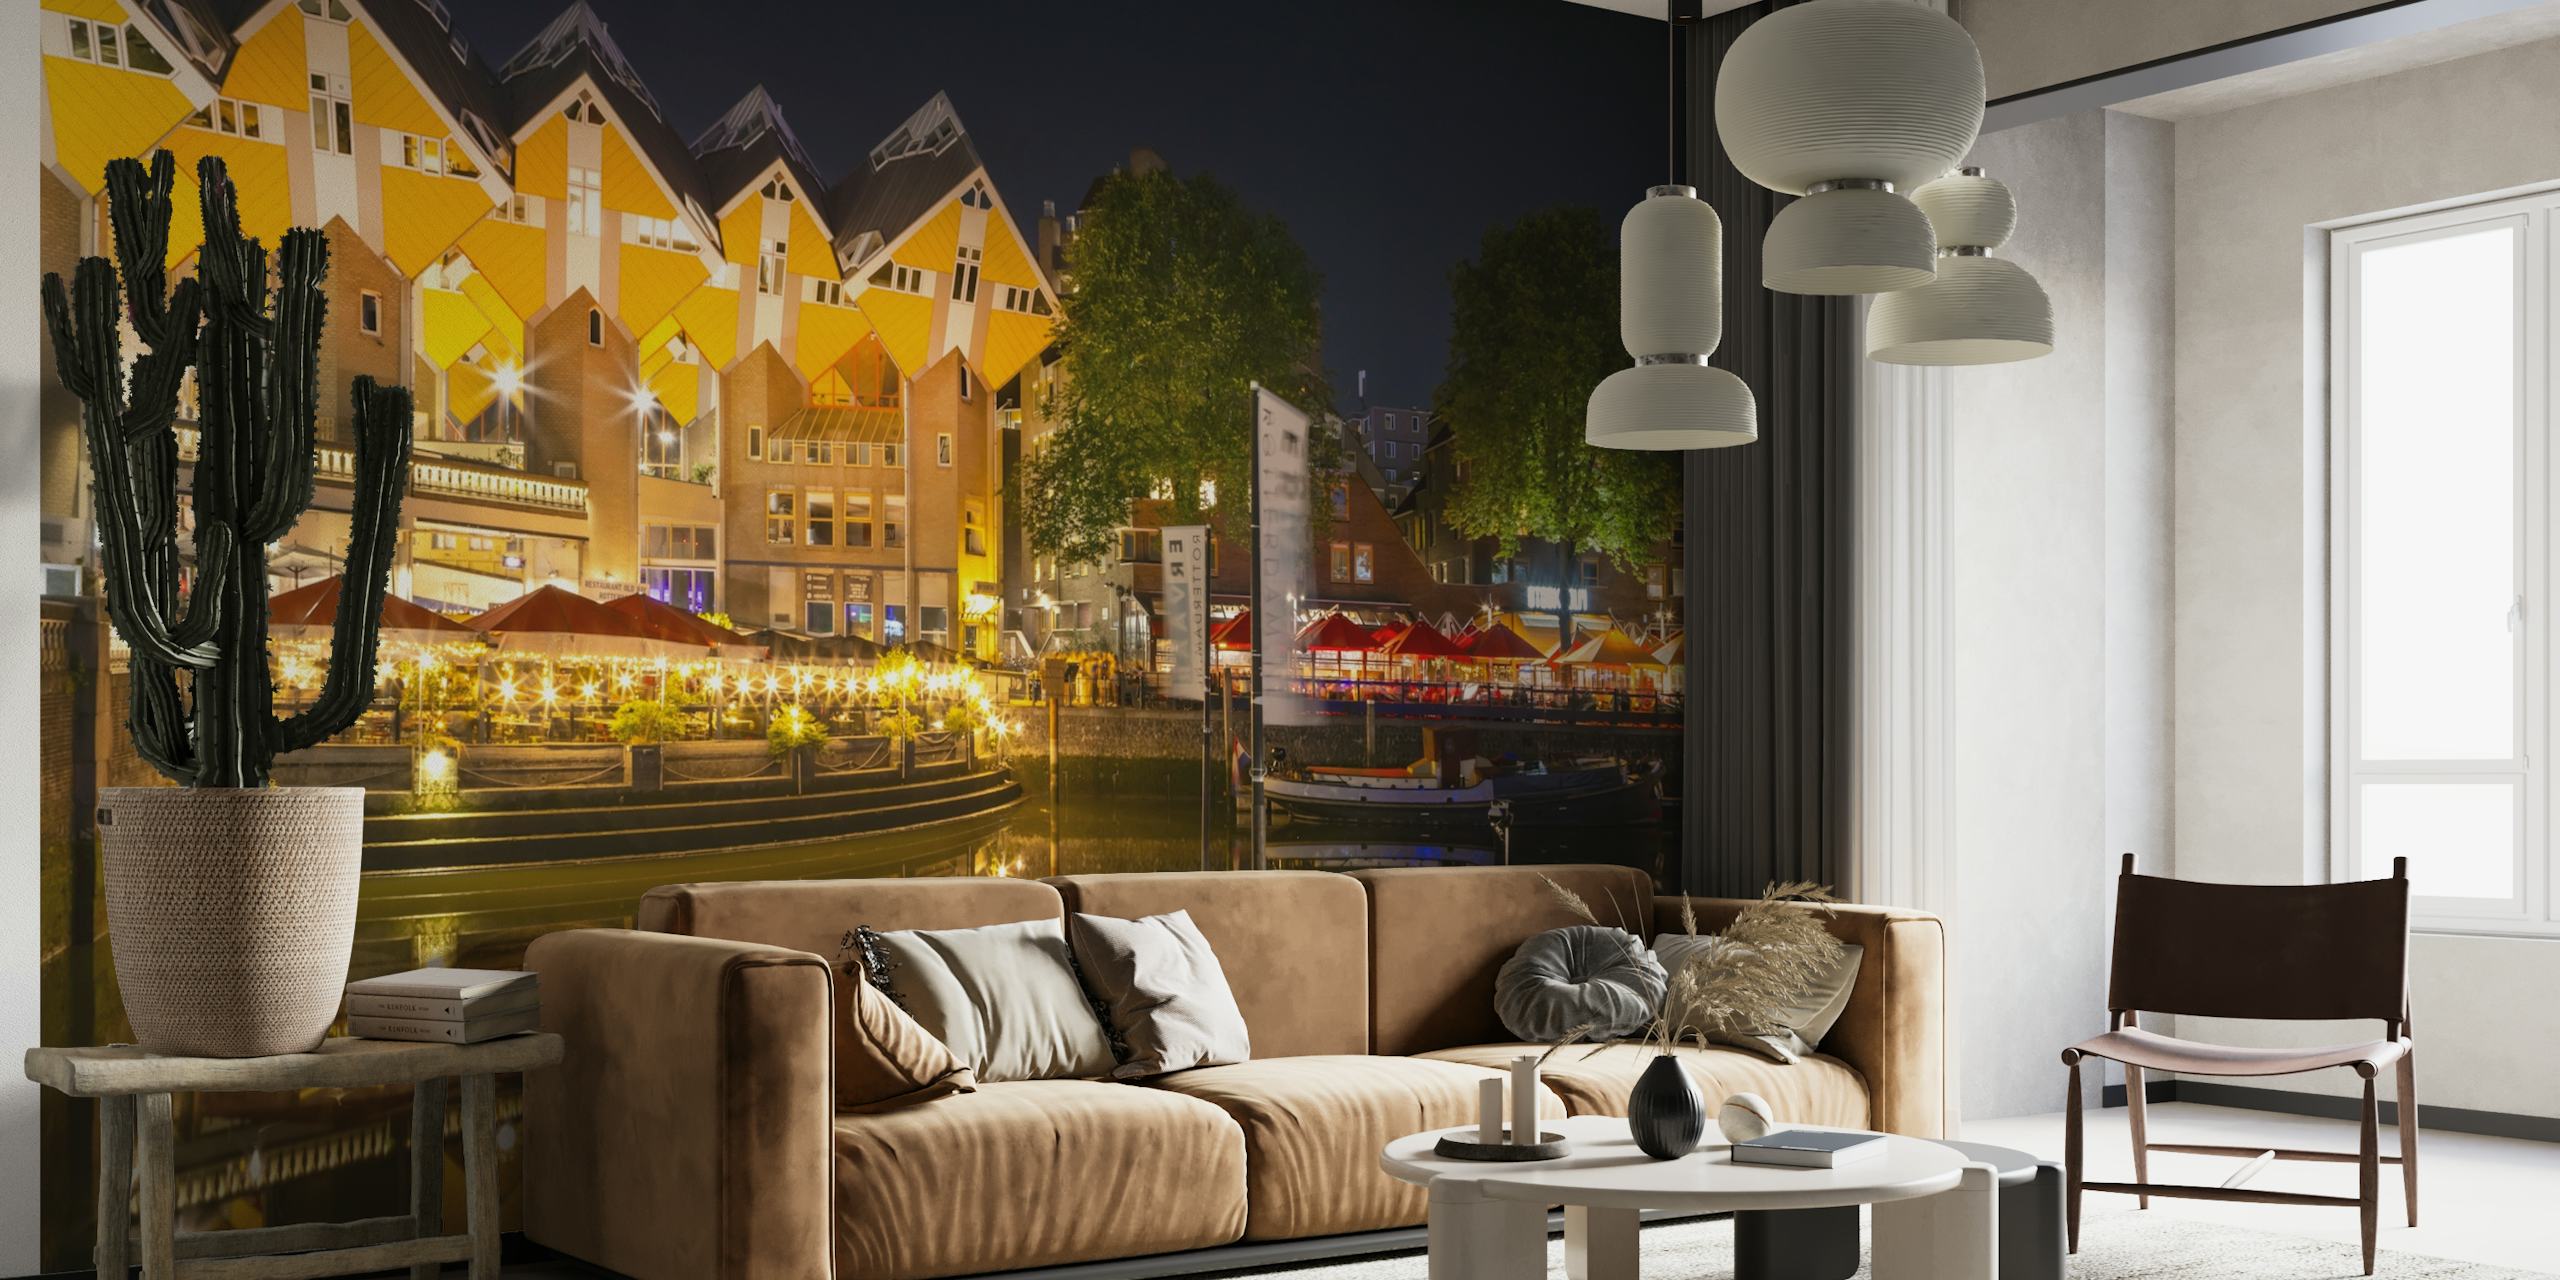 ROTTERDAM Oude Haven and Cube Houses by night wallpaper